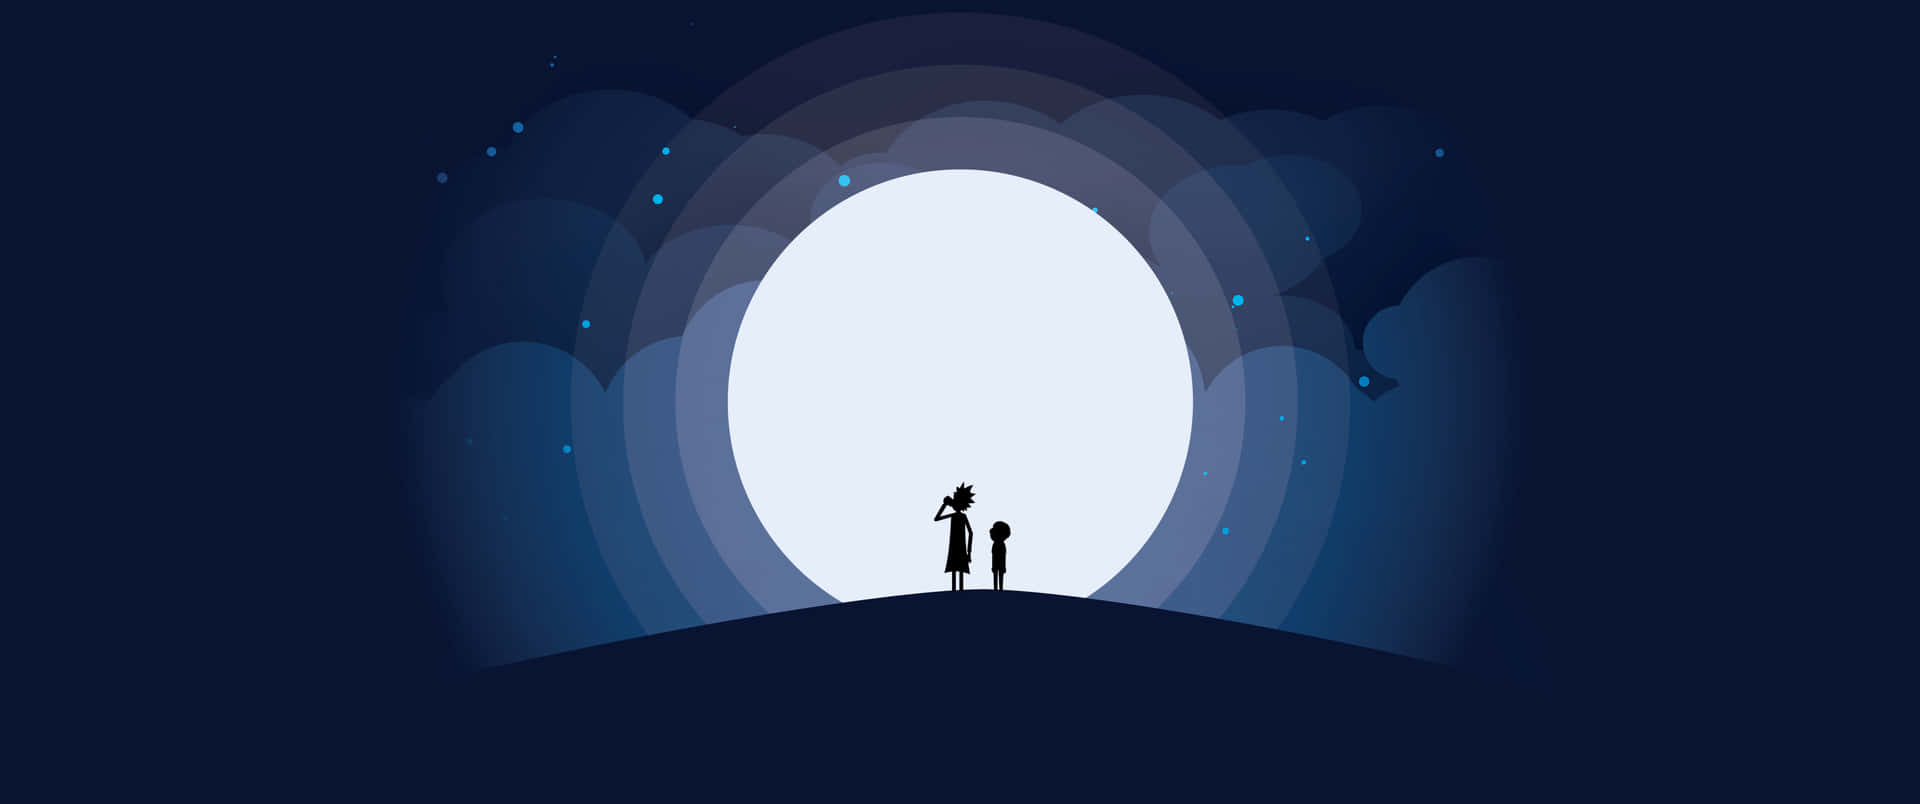 A Man And Woman Standing On A Hill With A Light Shining Through The Sky Wallpaper